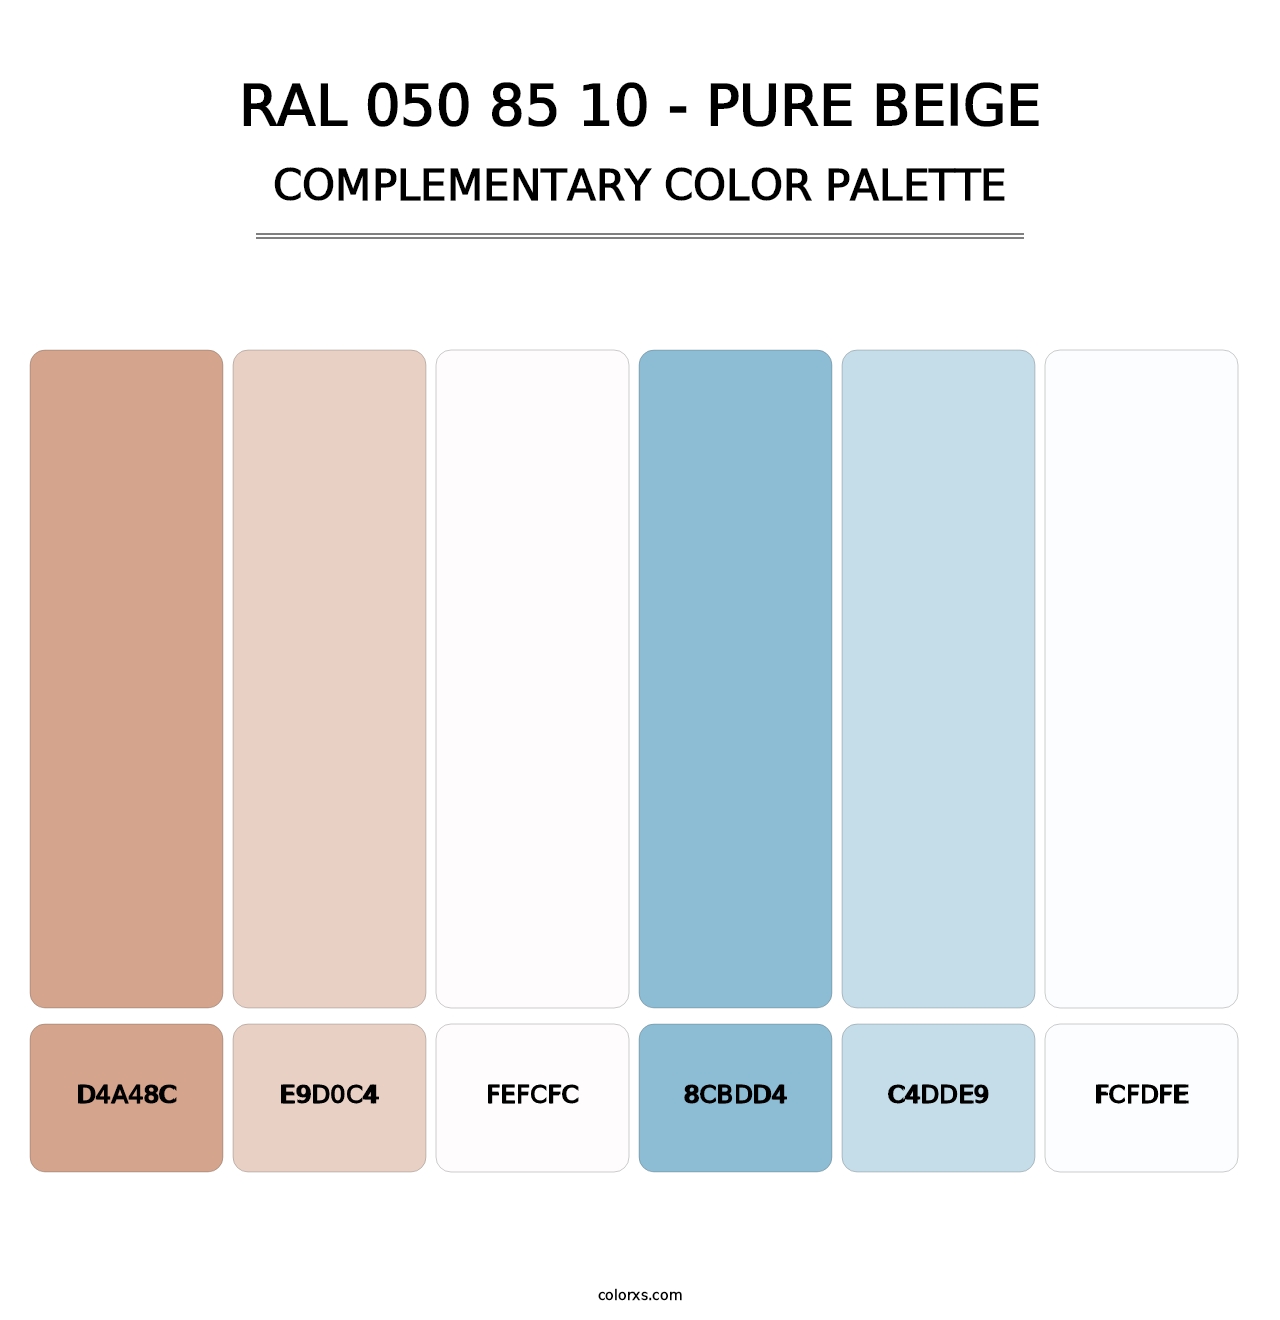 RAL 050 85 10 - Pure Beige - Complementary Color Palette